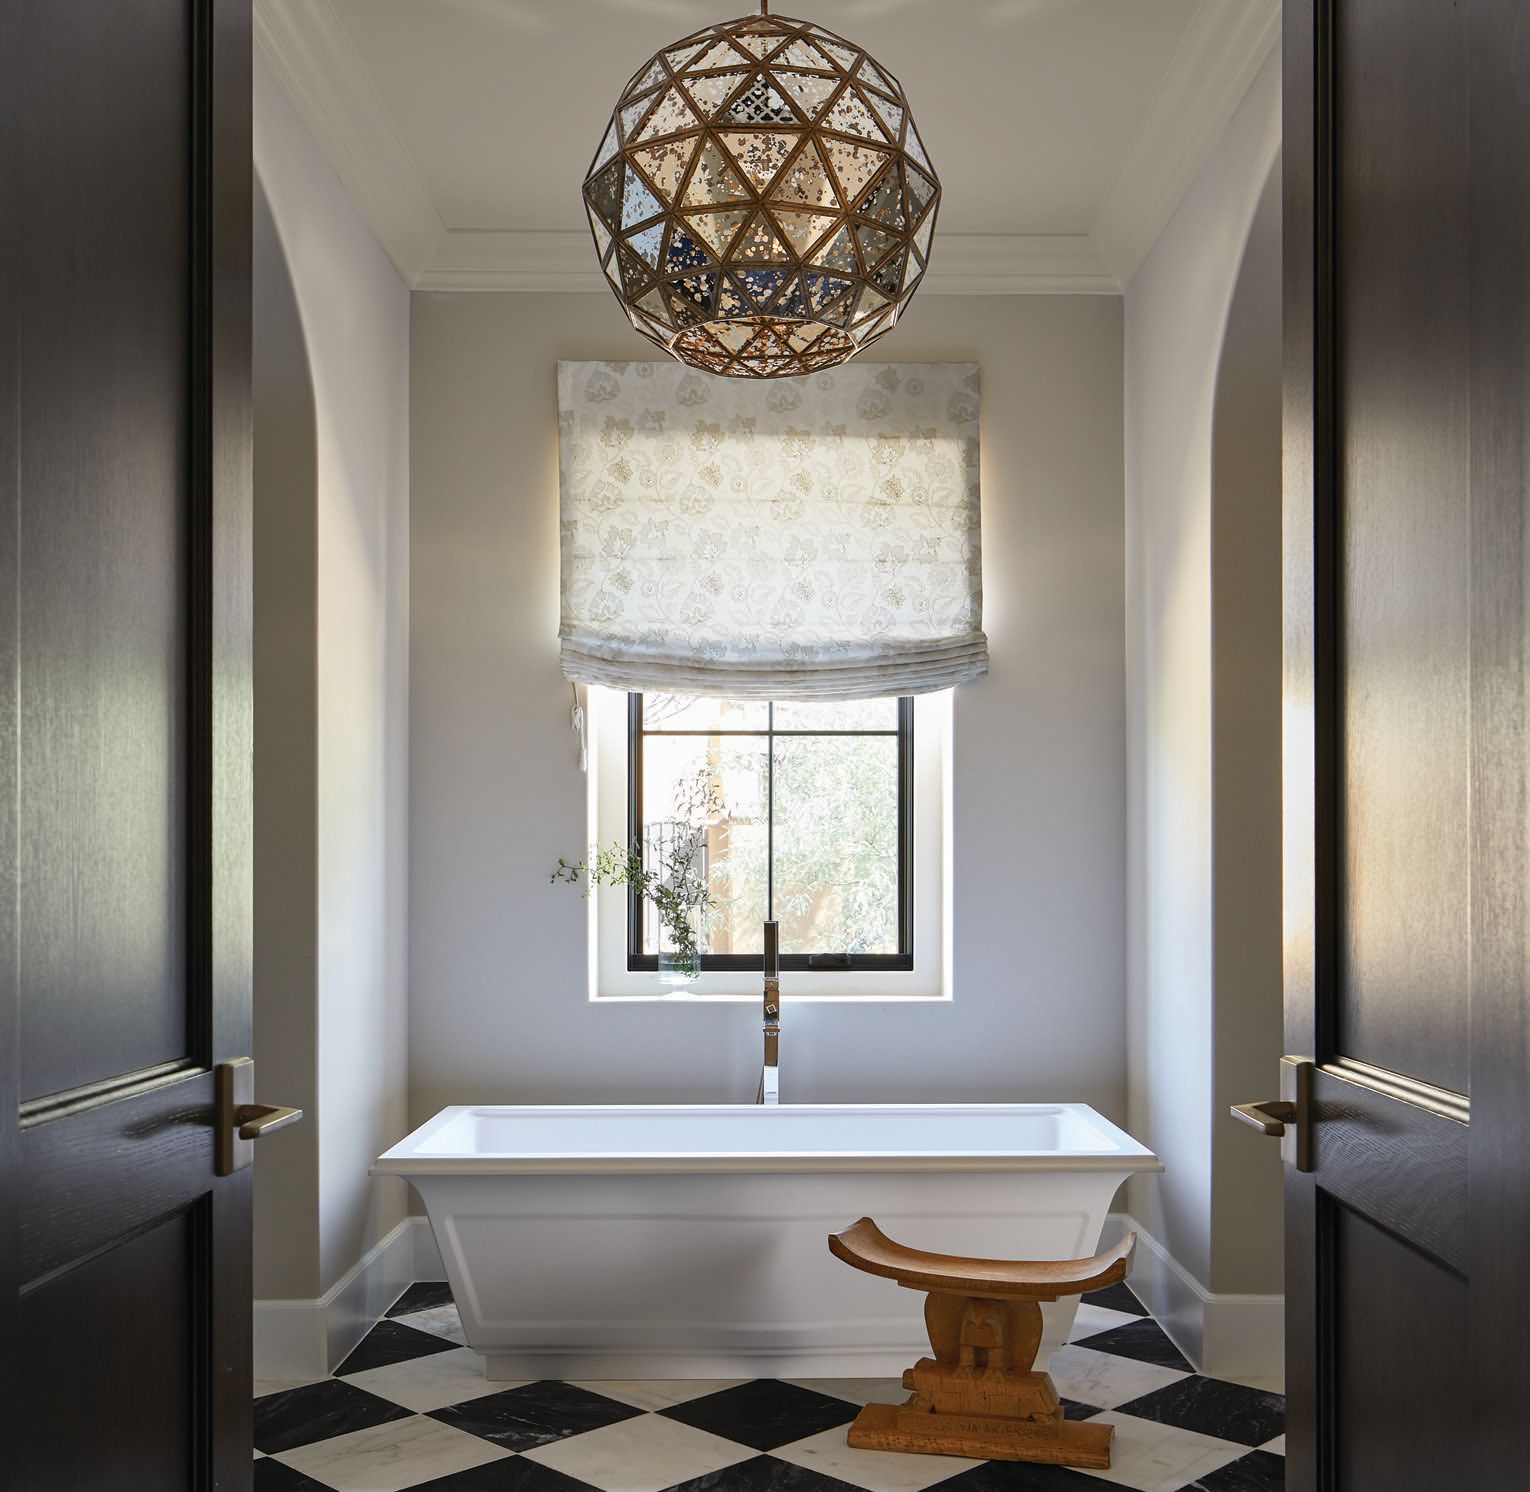 Benjamin Moore’s Winds Breath paint coats the walls in the primary bathroom, where a tub by Gessi and a pendant from Currey & Company preside. PHOTOGRAPHED BY LAURA MOSS